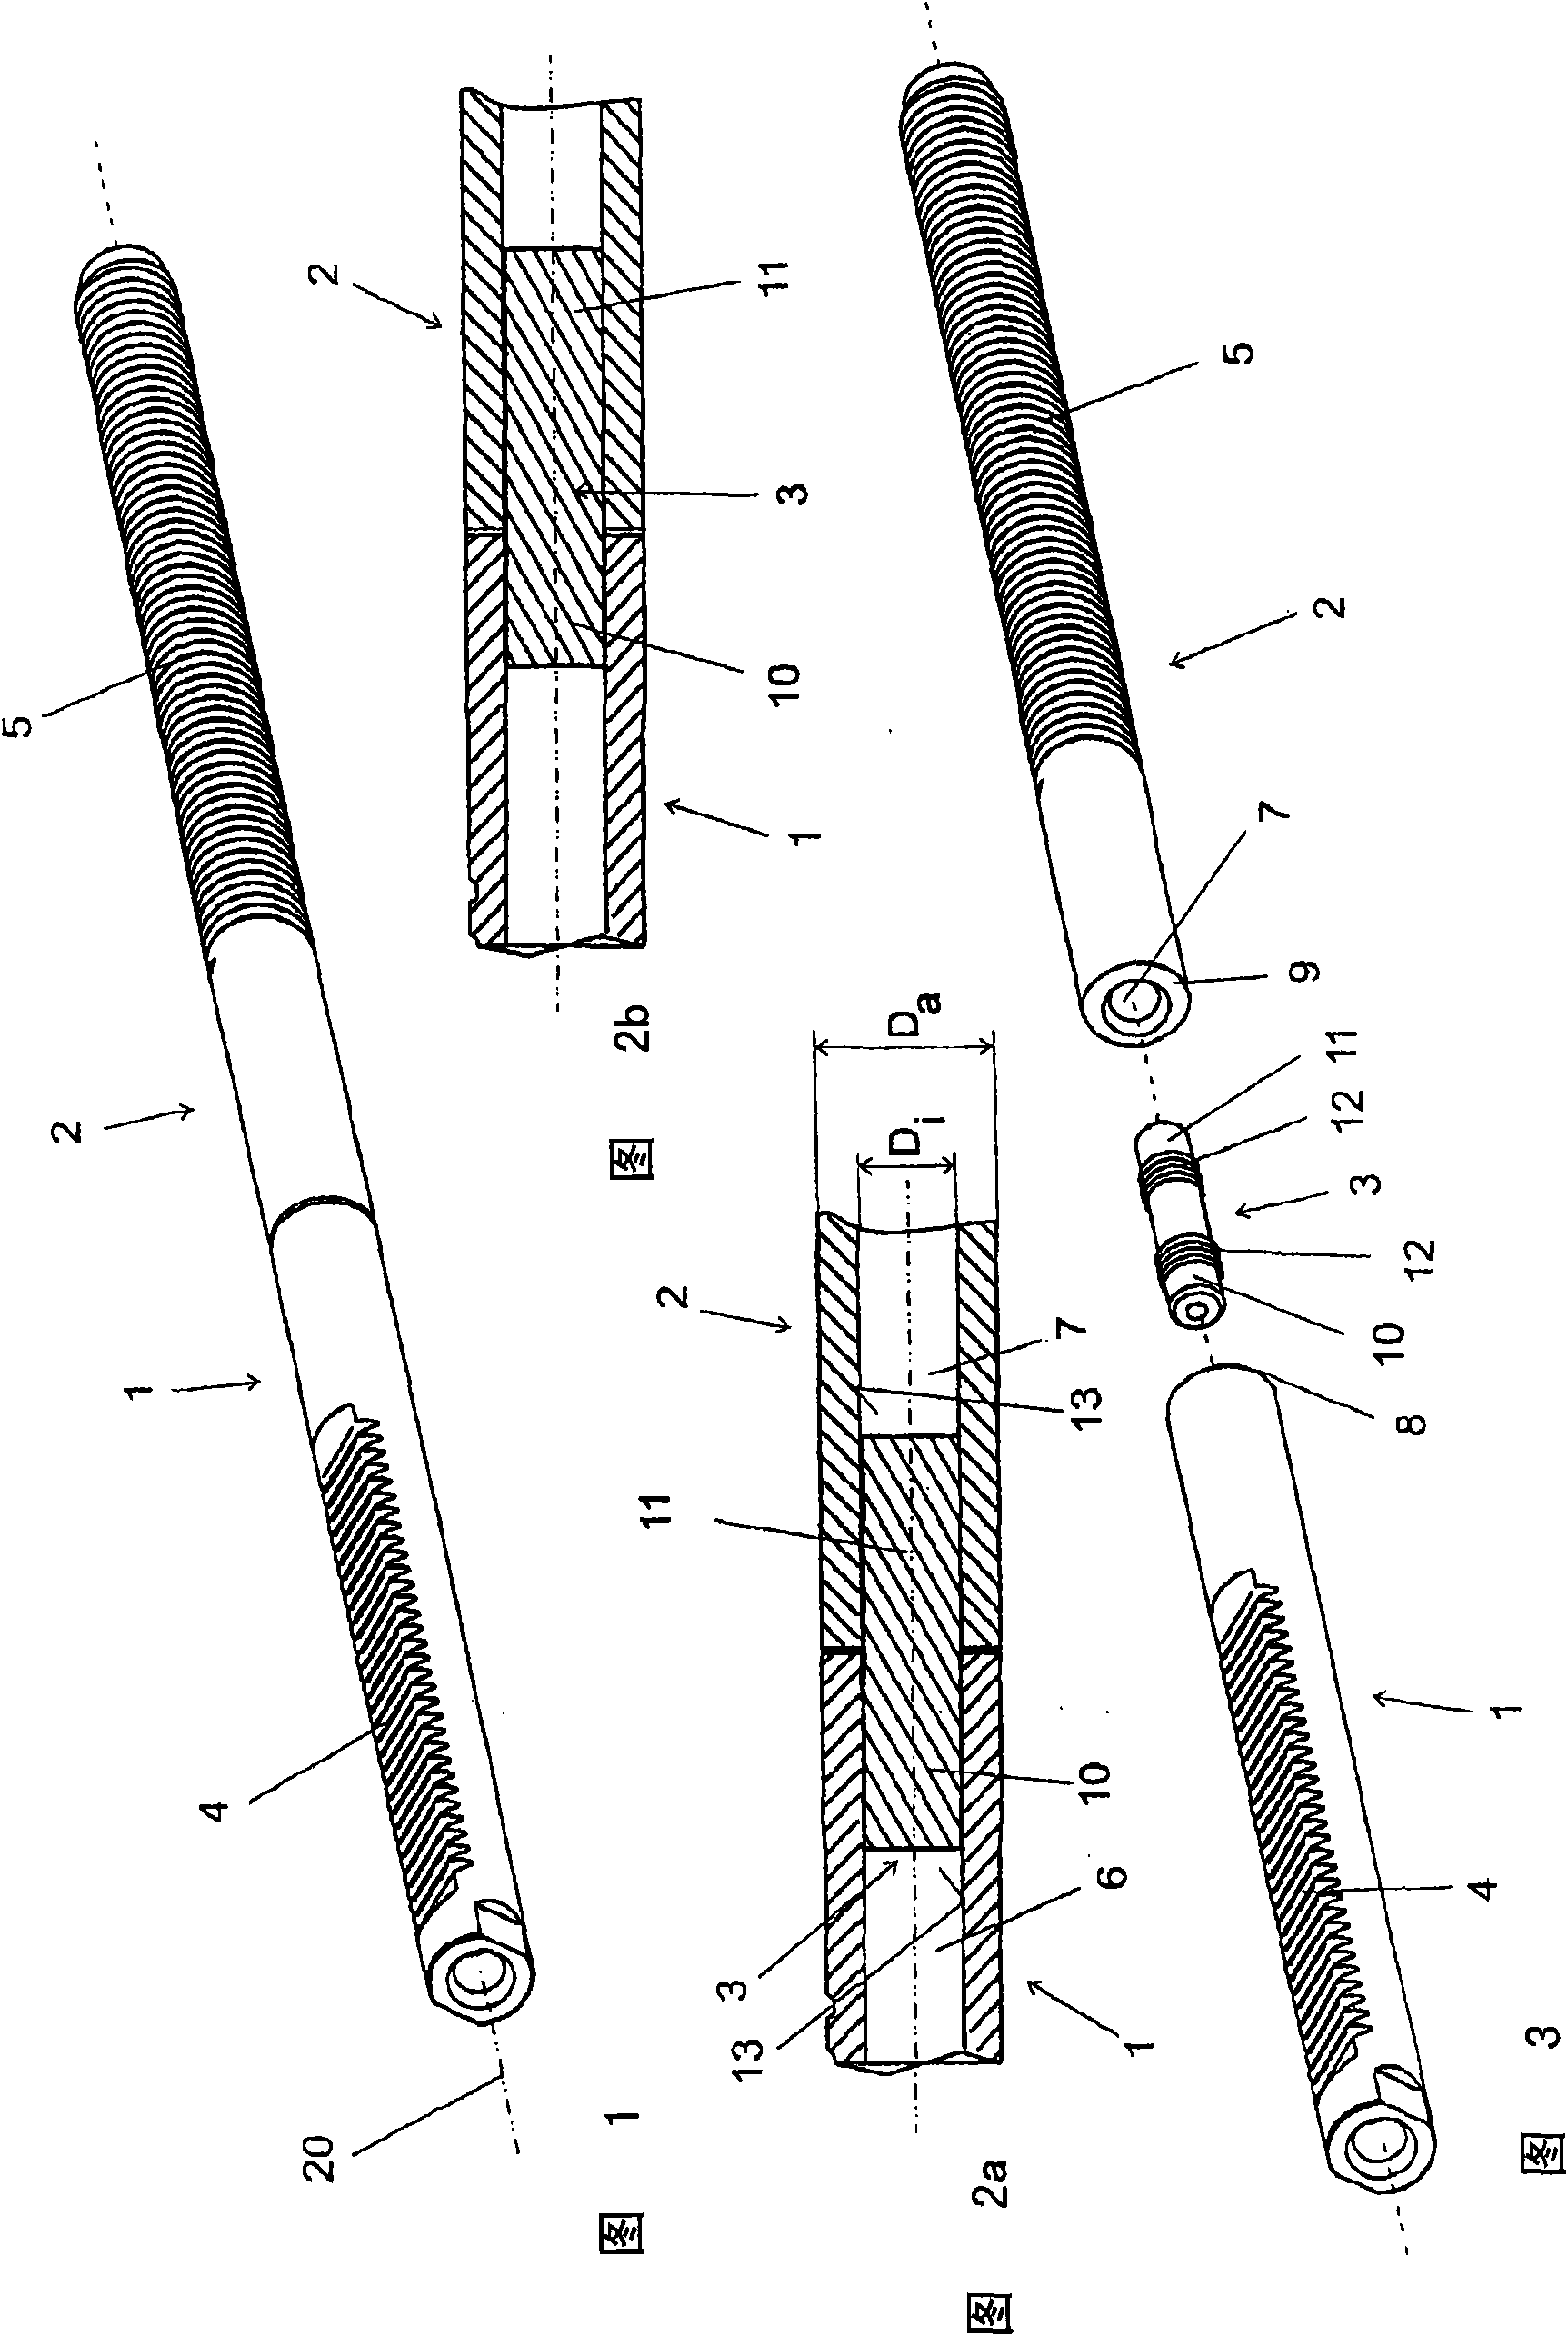 Toothed or threaded rod